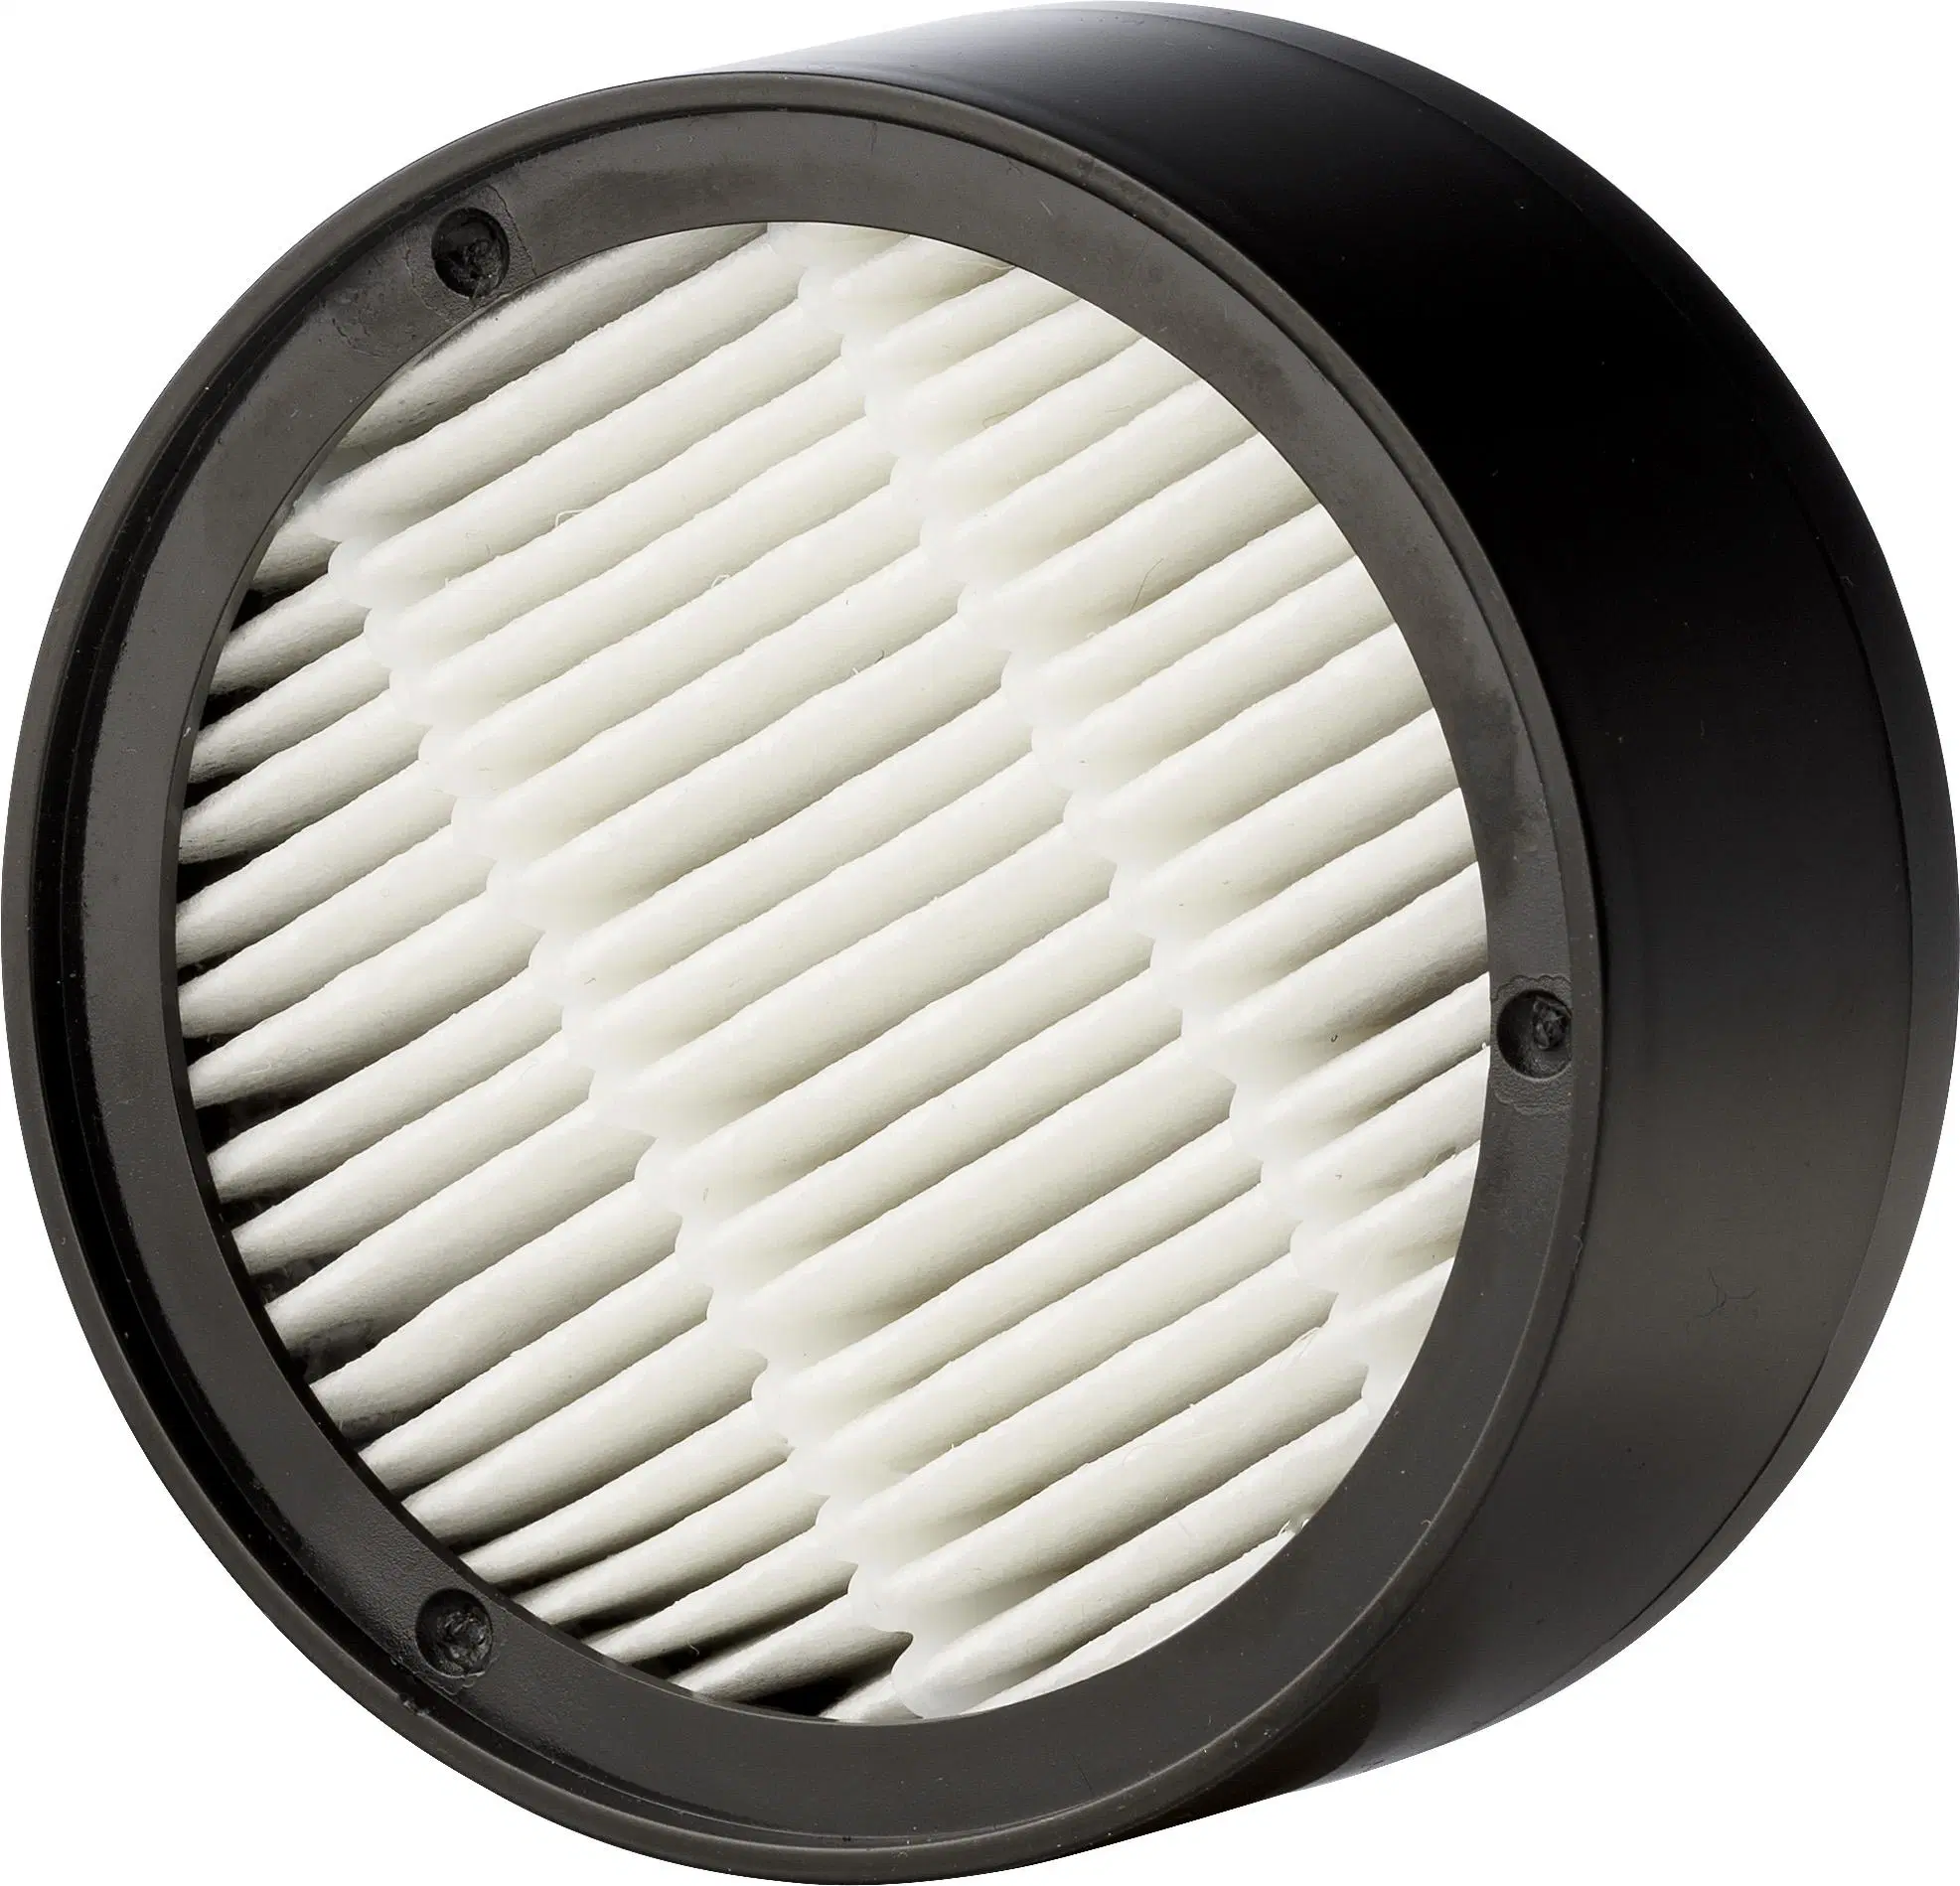 Ture HEPA Filter Portable Negative Ion Car New Arrival Air Purifier